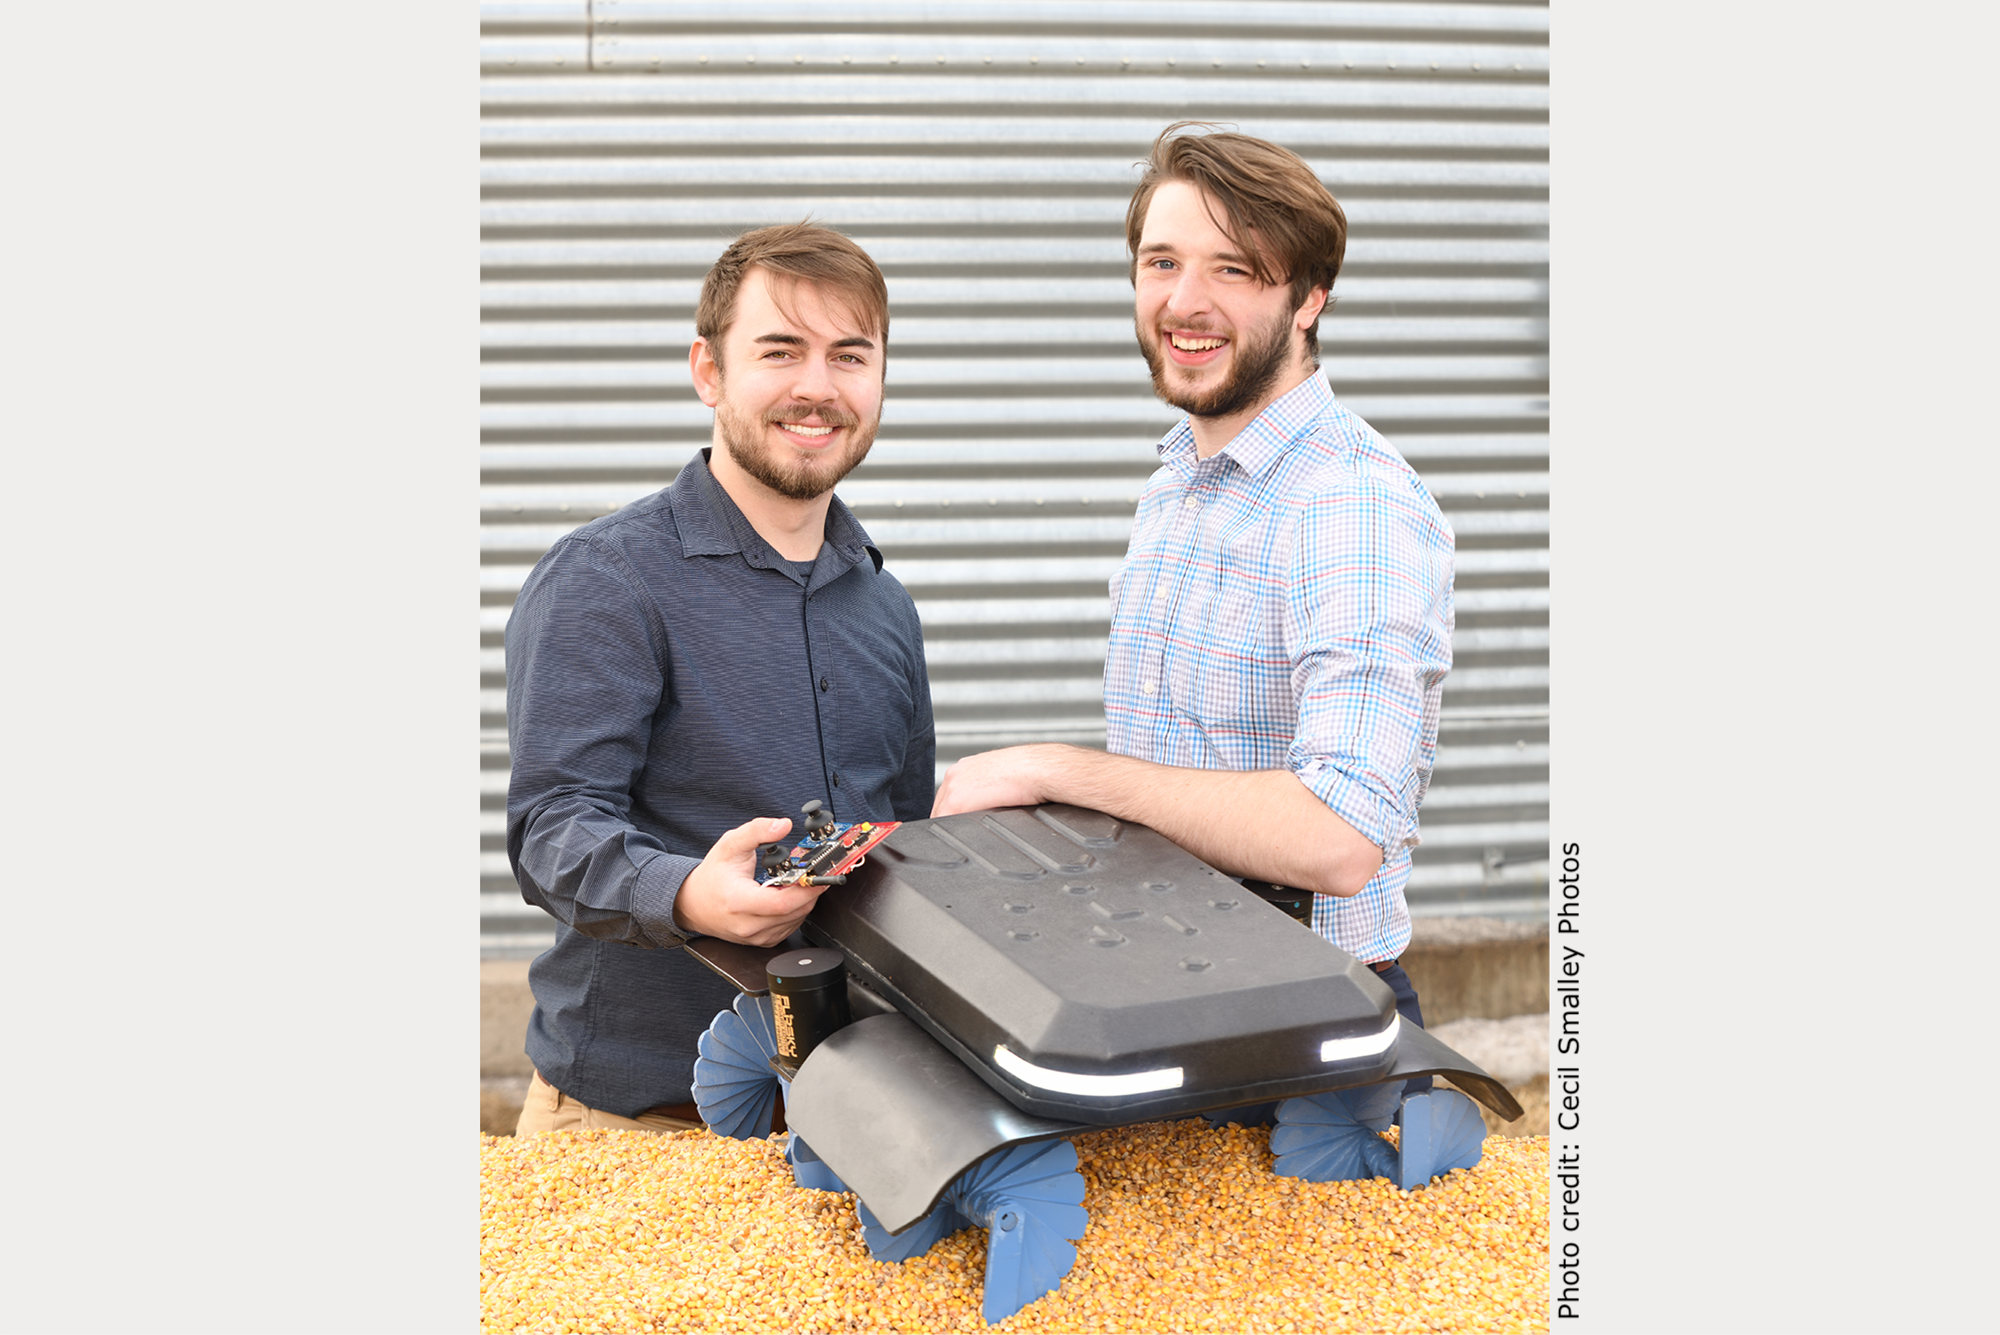 University of Nebraska Omaha undergraduate students Benjamin Johnson and Zane Zents with their Grain Weevil robot that is sitting on top of a pile of grain.